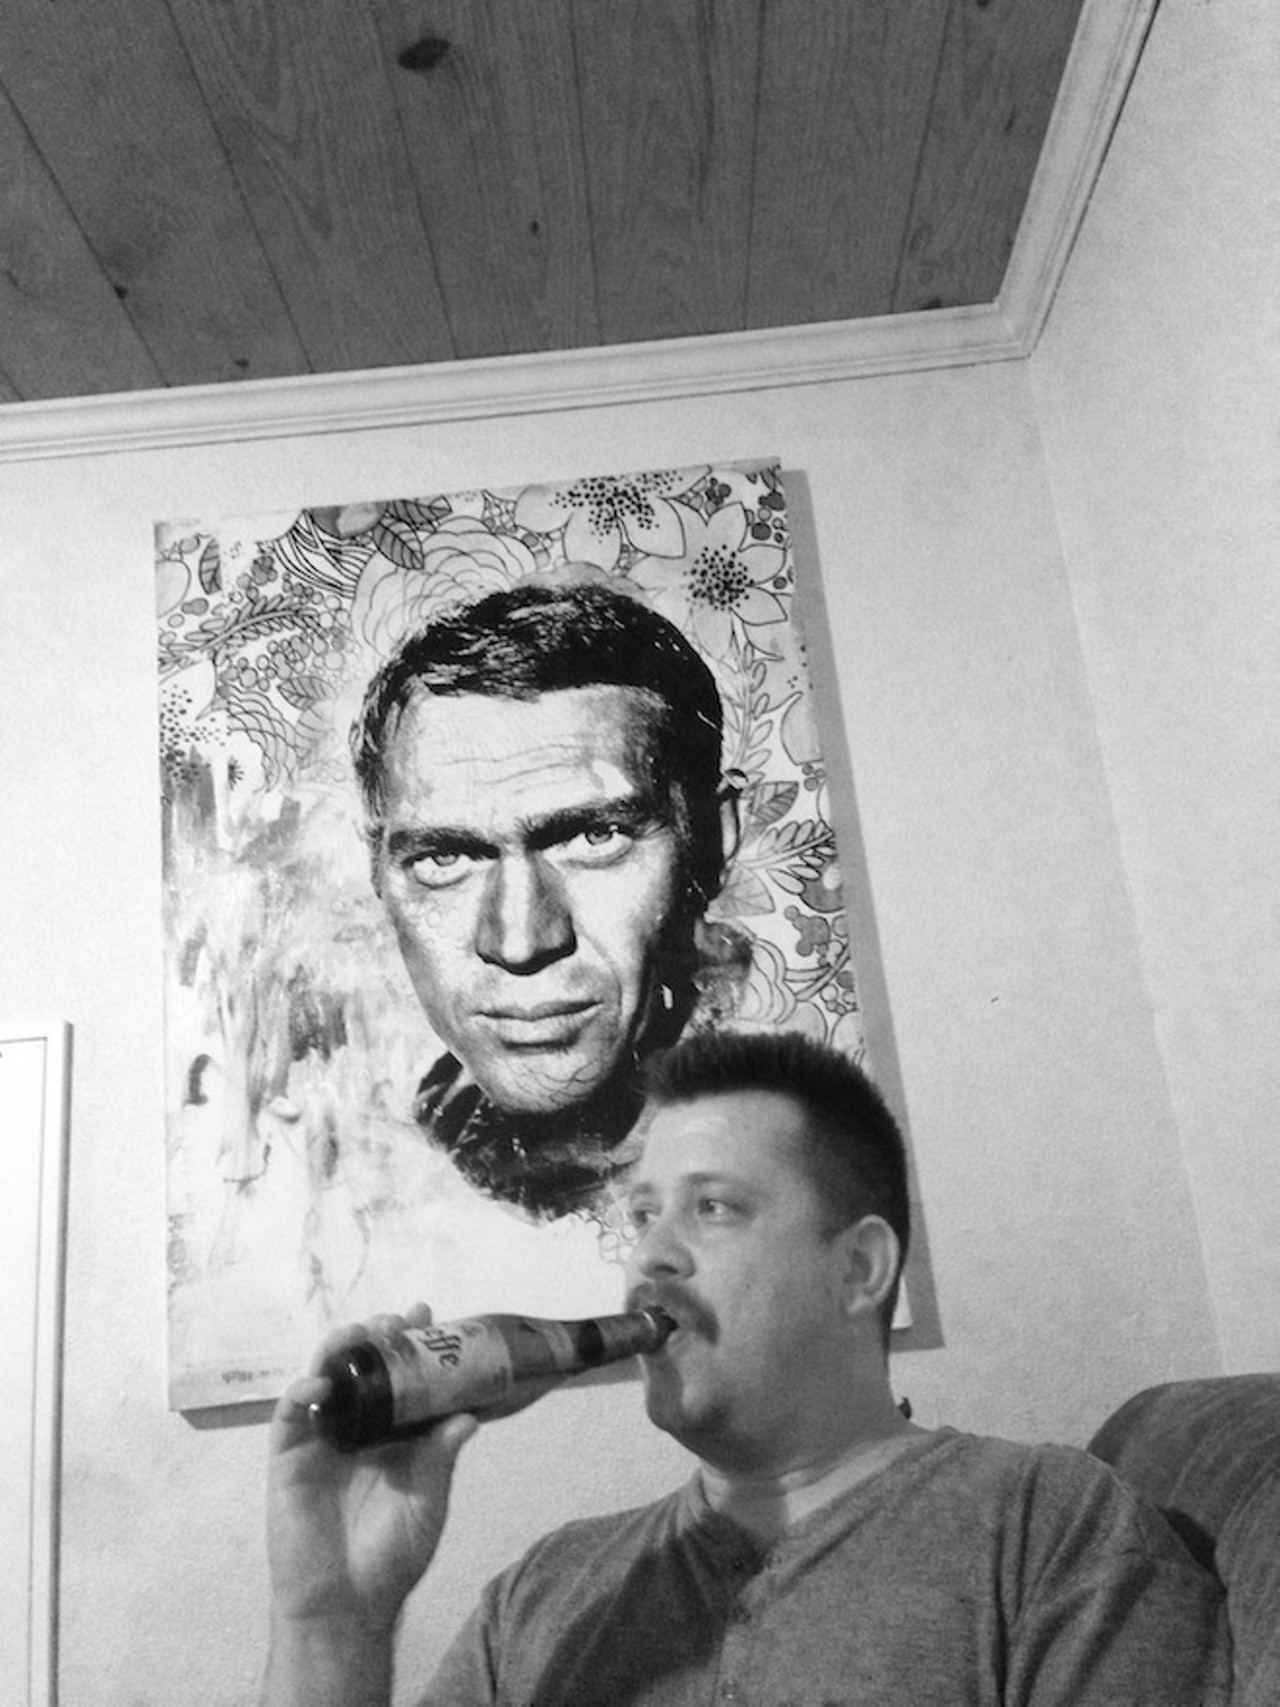 Drinking with Steve McQueen